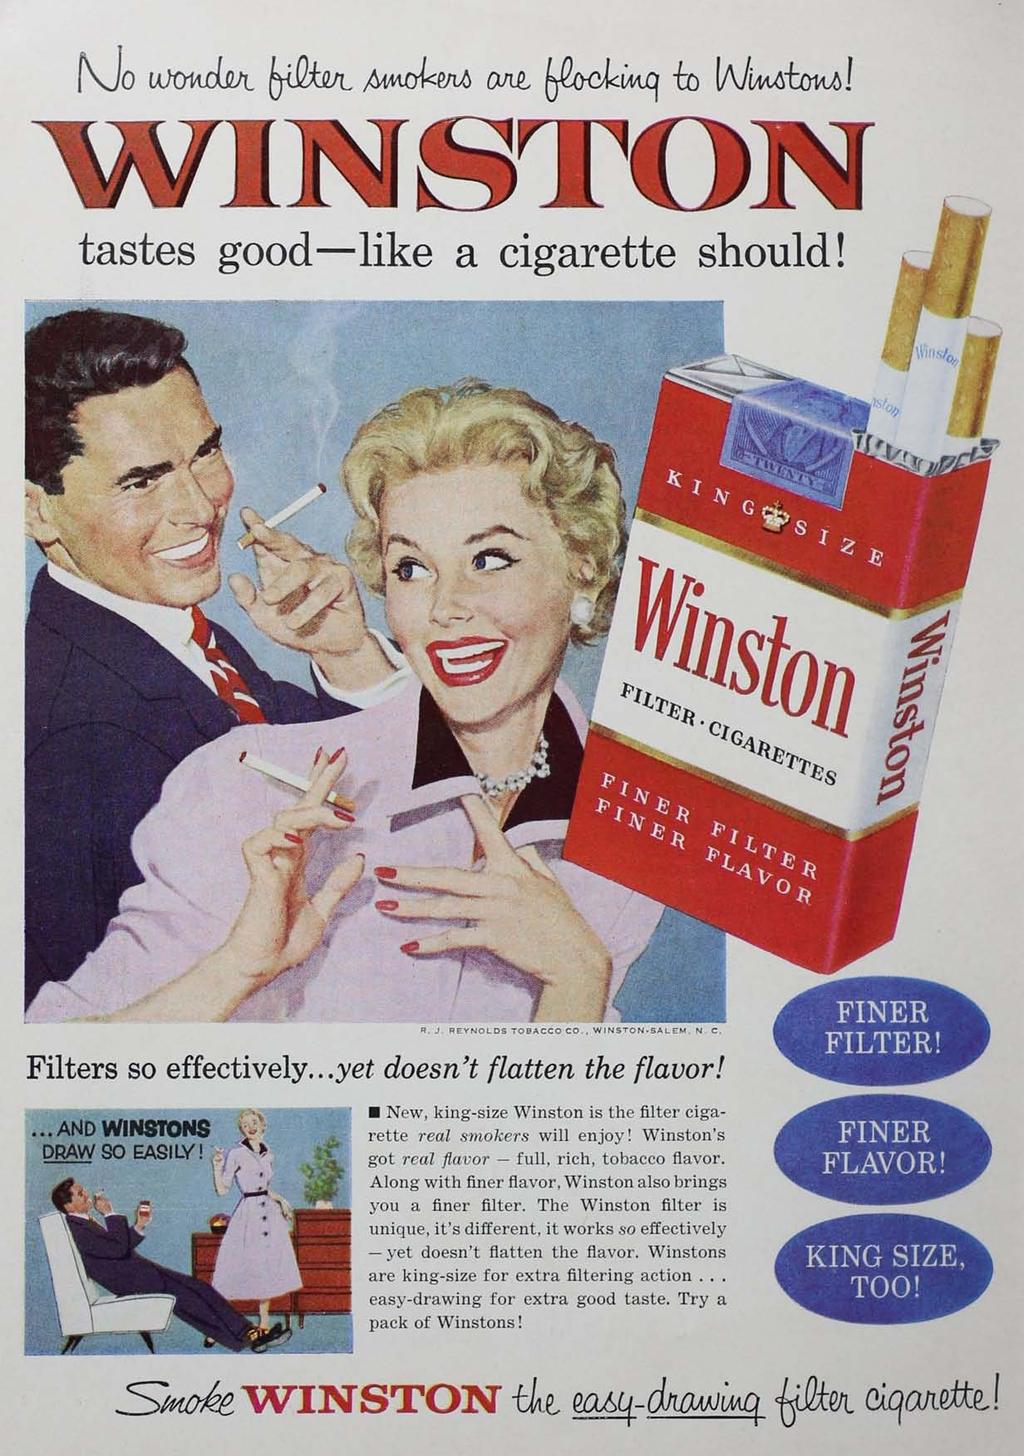 tastes good -like a cigarette should! Filters so effectively... yet doesn't flatten the flavor!... ANDWlN8IOH8 DRAW 90 (;AgILY!